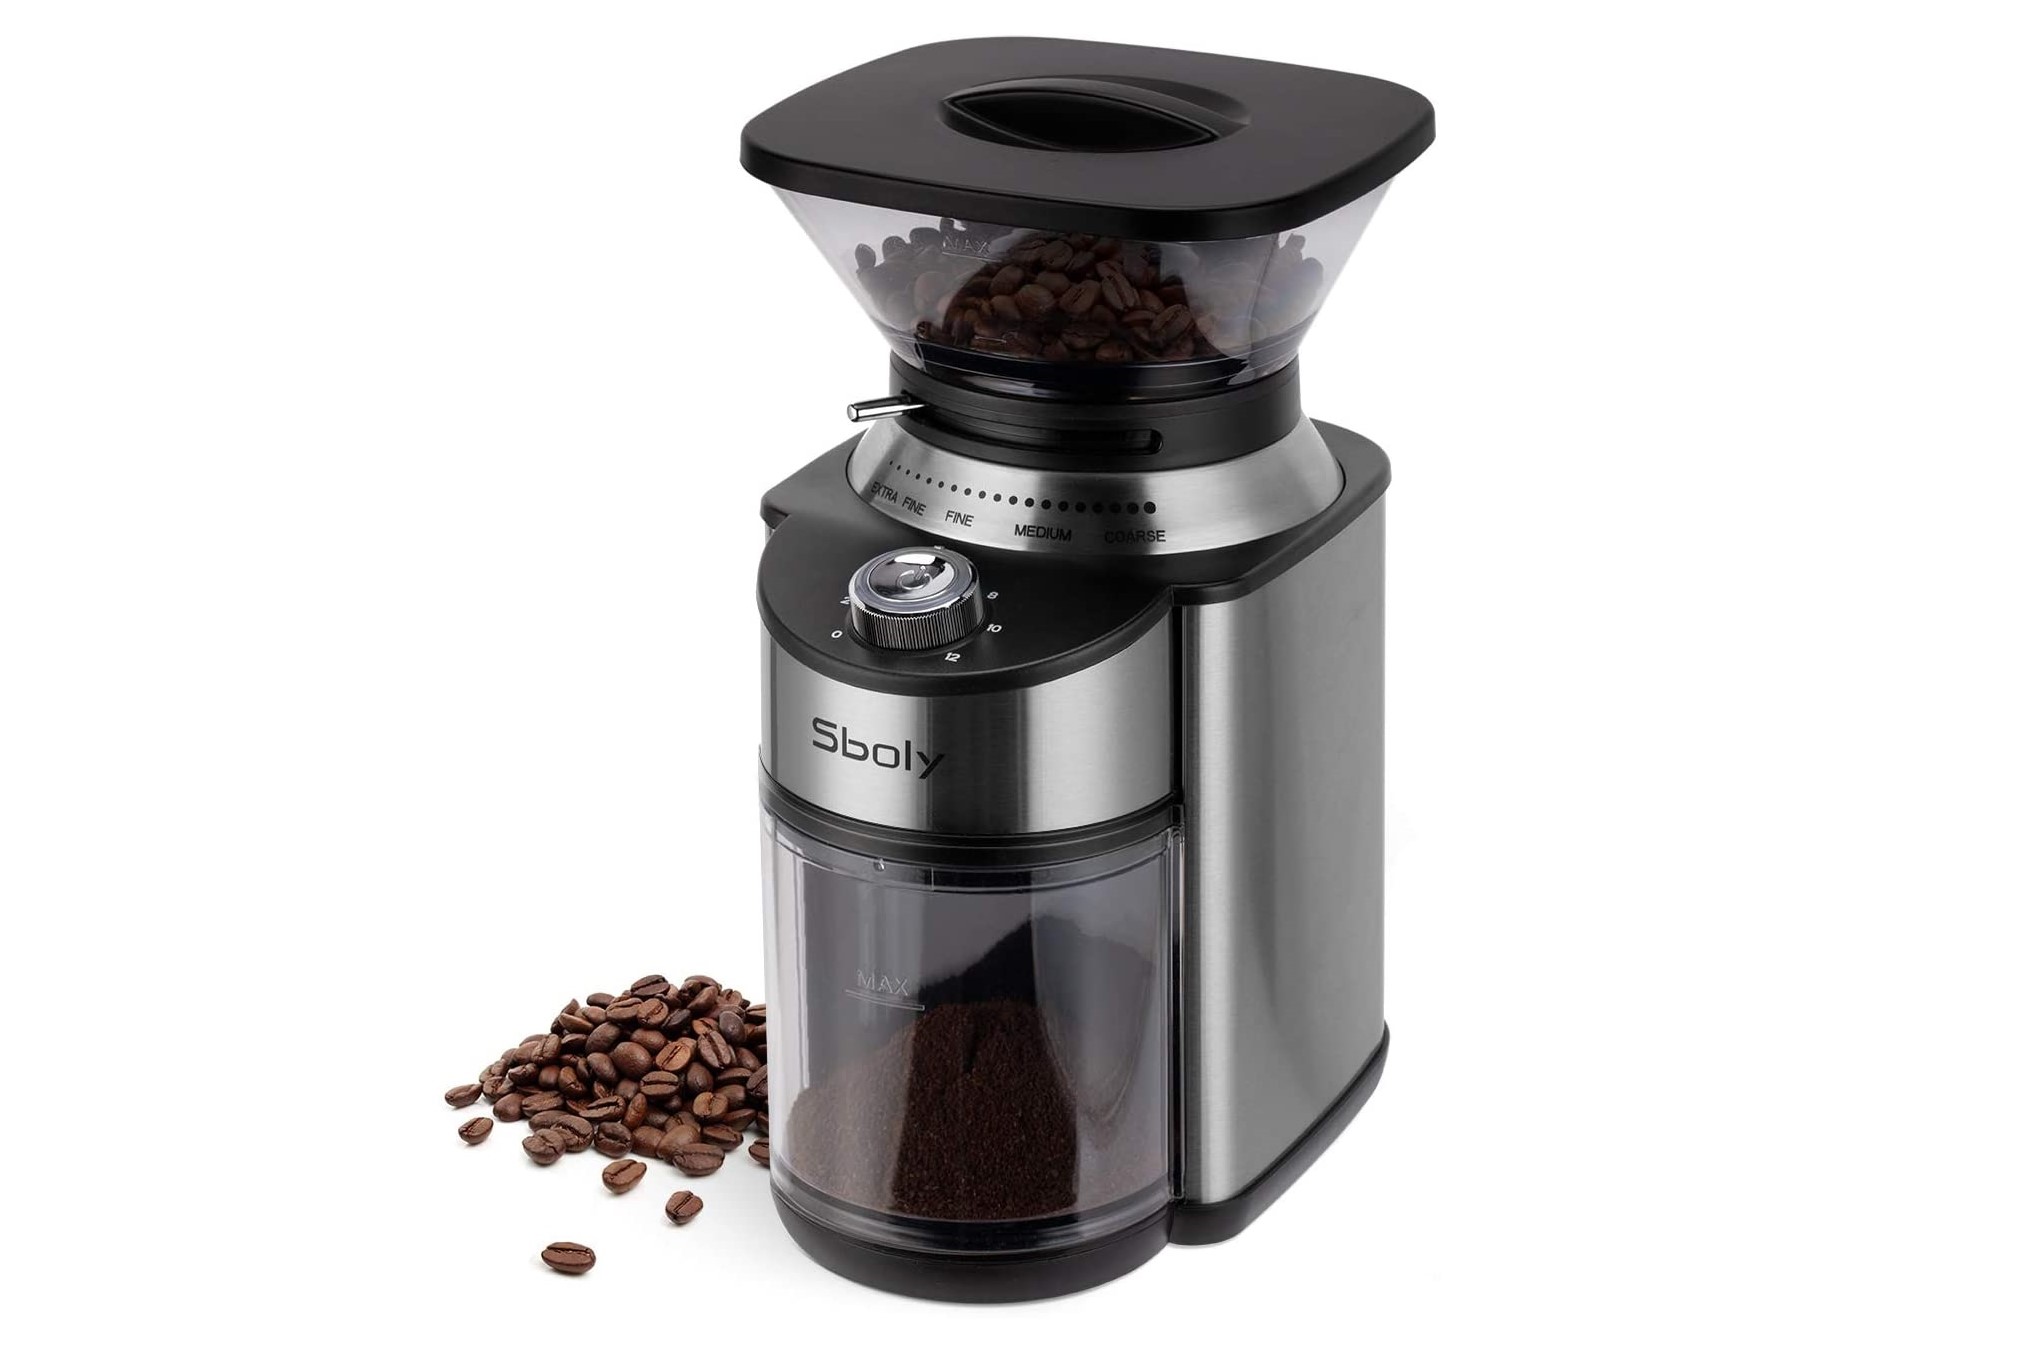 https://www.themanual.com/wp-content/uploads/sites/9/2020/09/sboly-conical-burr-coffee-grinder.jpg?fit=800%2C800&p=1